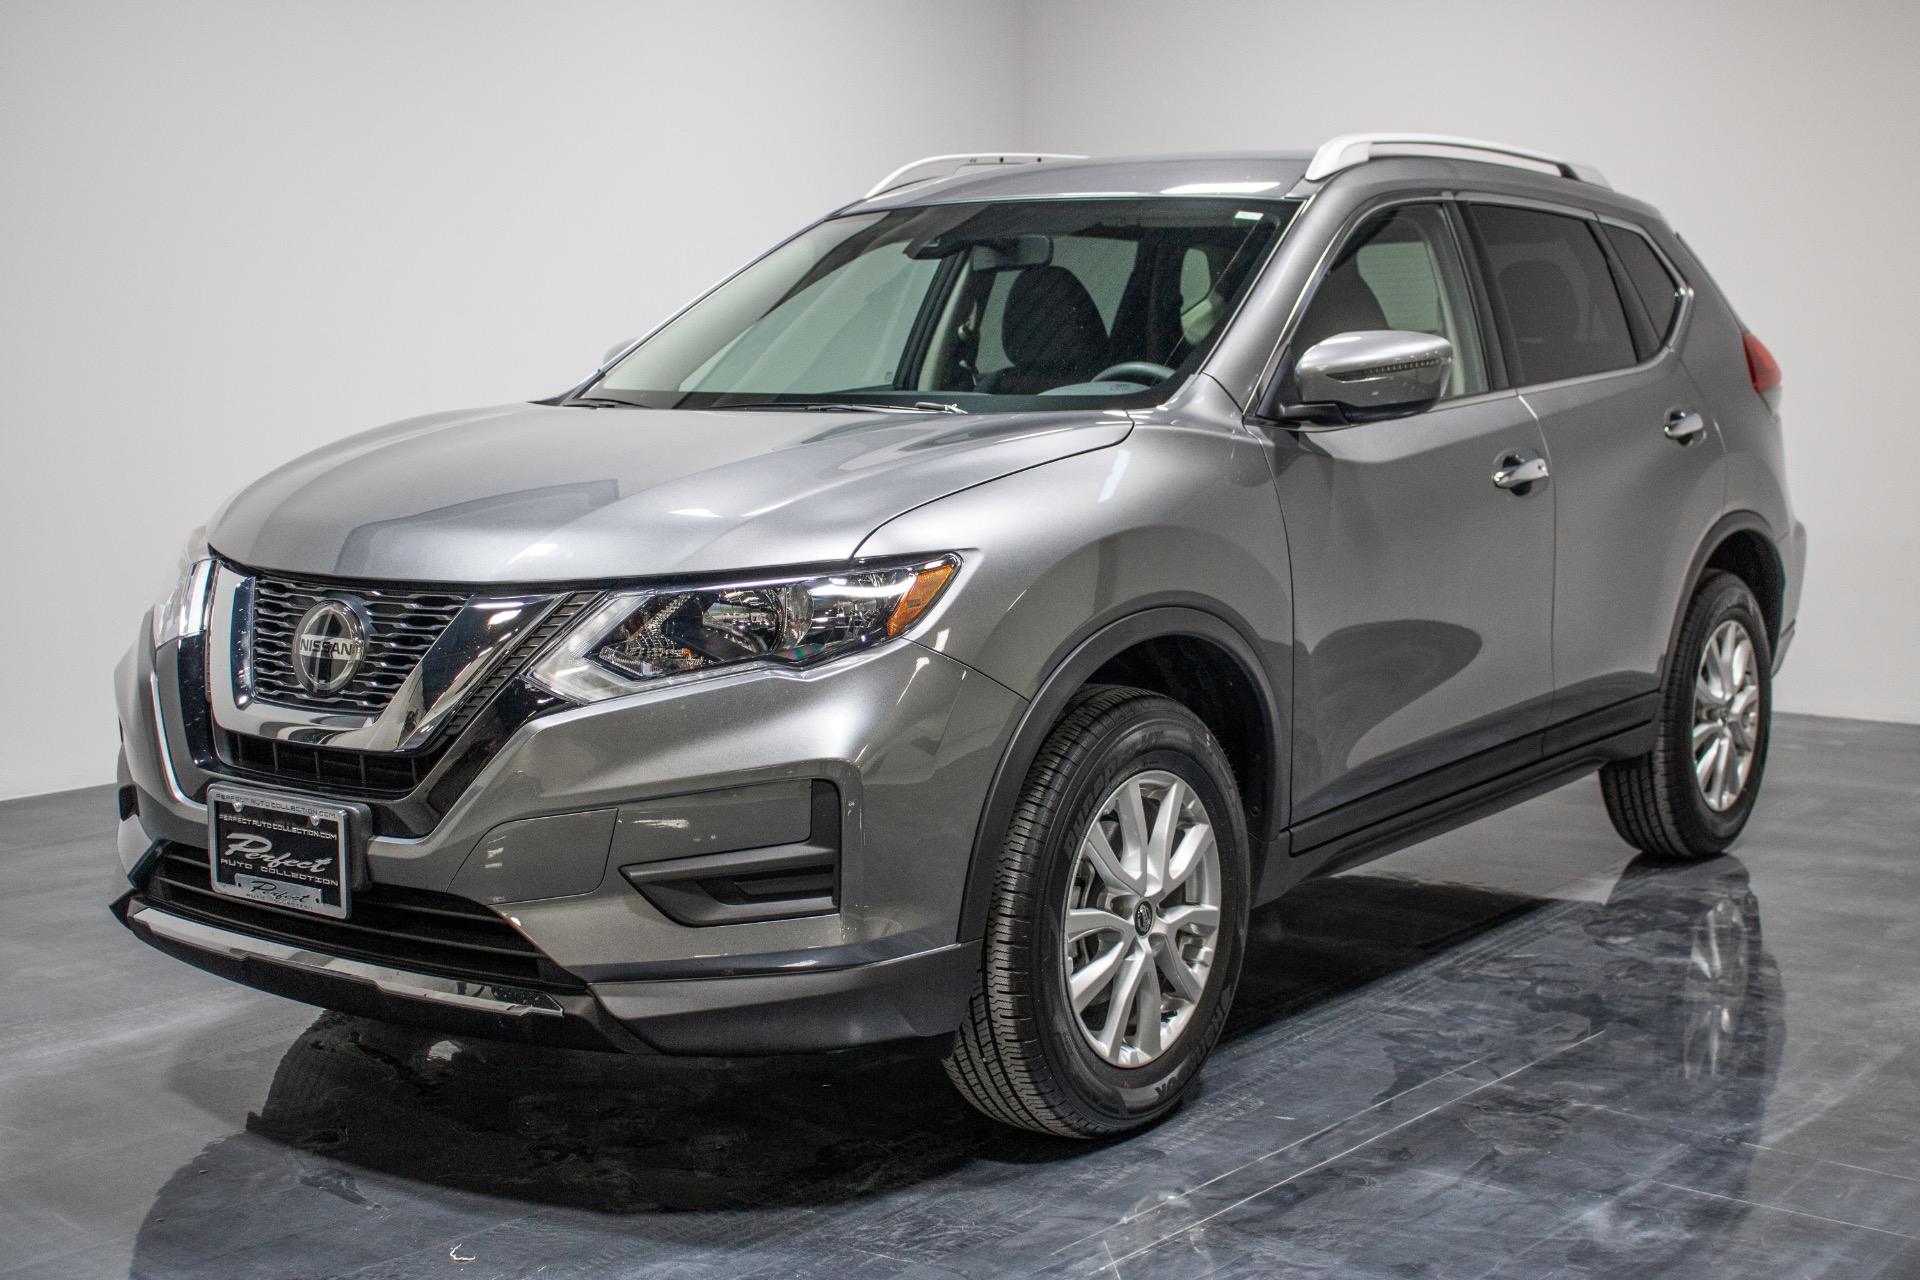 Used 2019 Nissan Rogue SV Sport Utility 4D For Sale 18 993 Perfect 